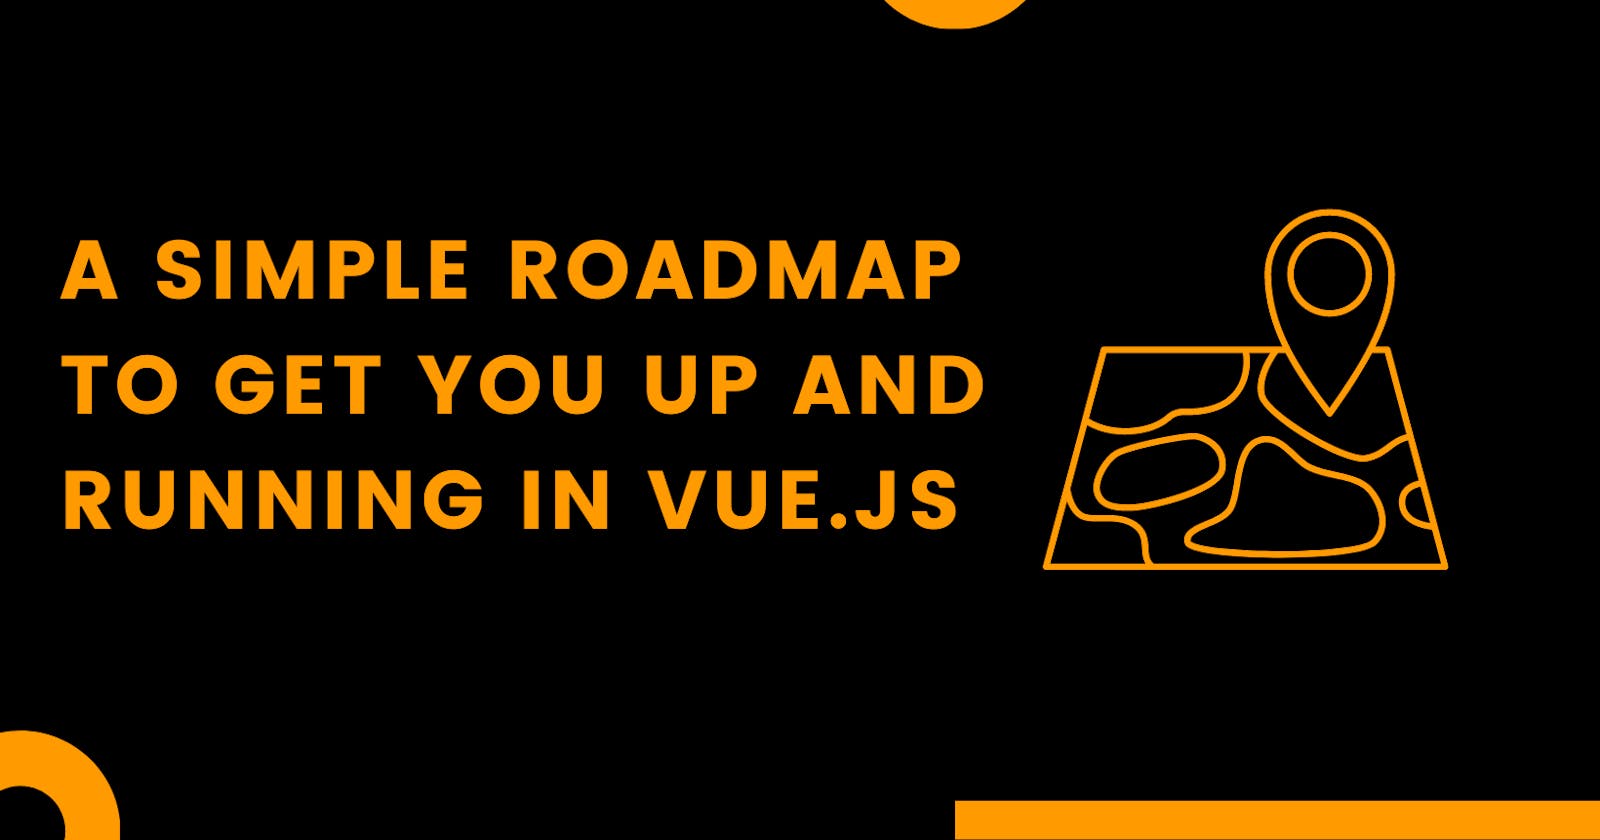 A Simple Roadmap to Get You Up and Running in Vue.js